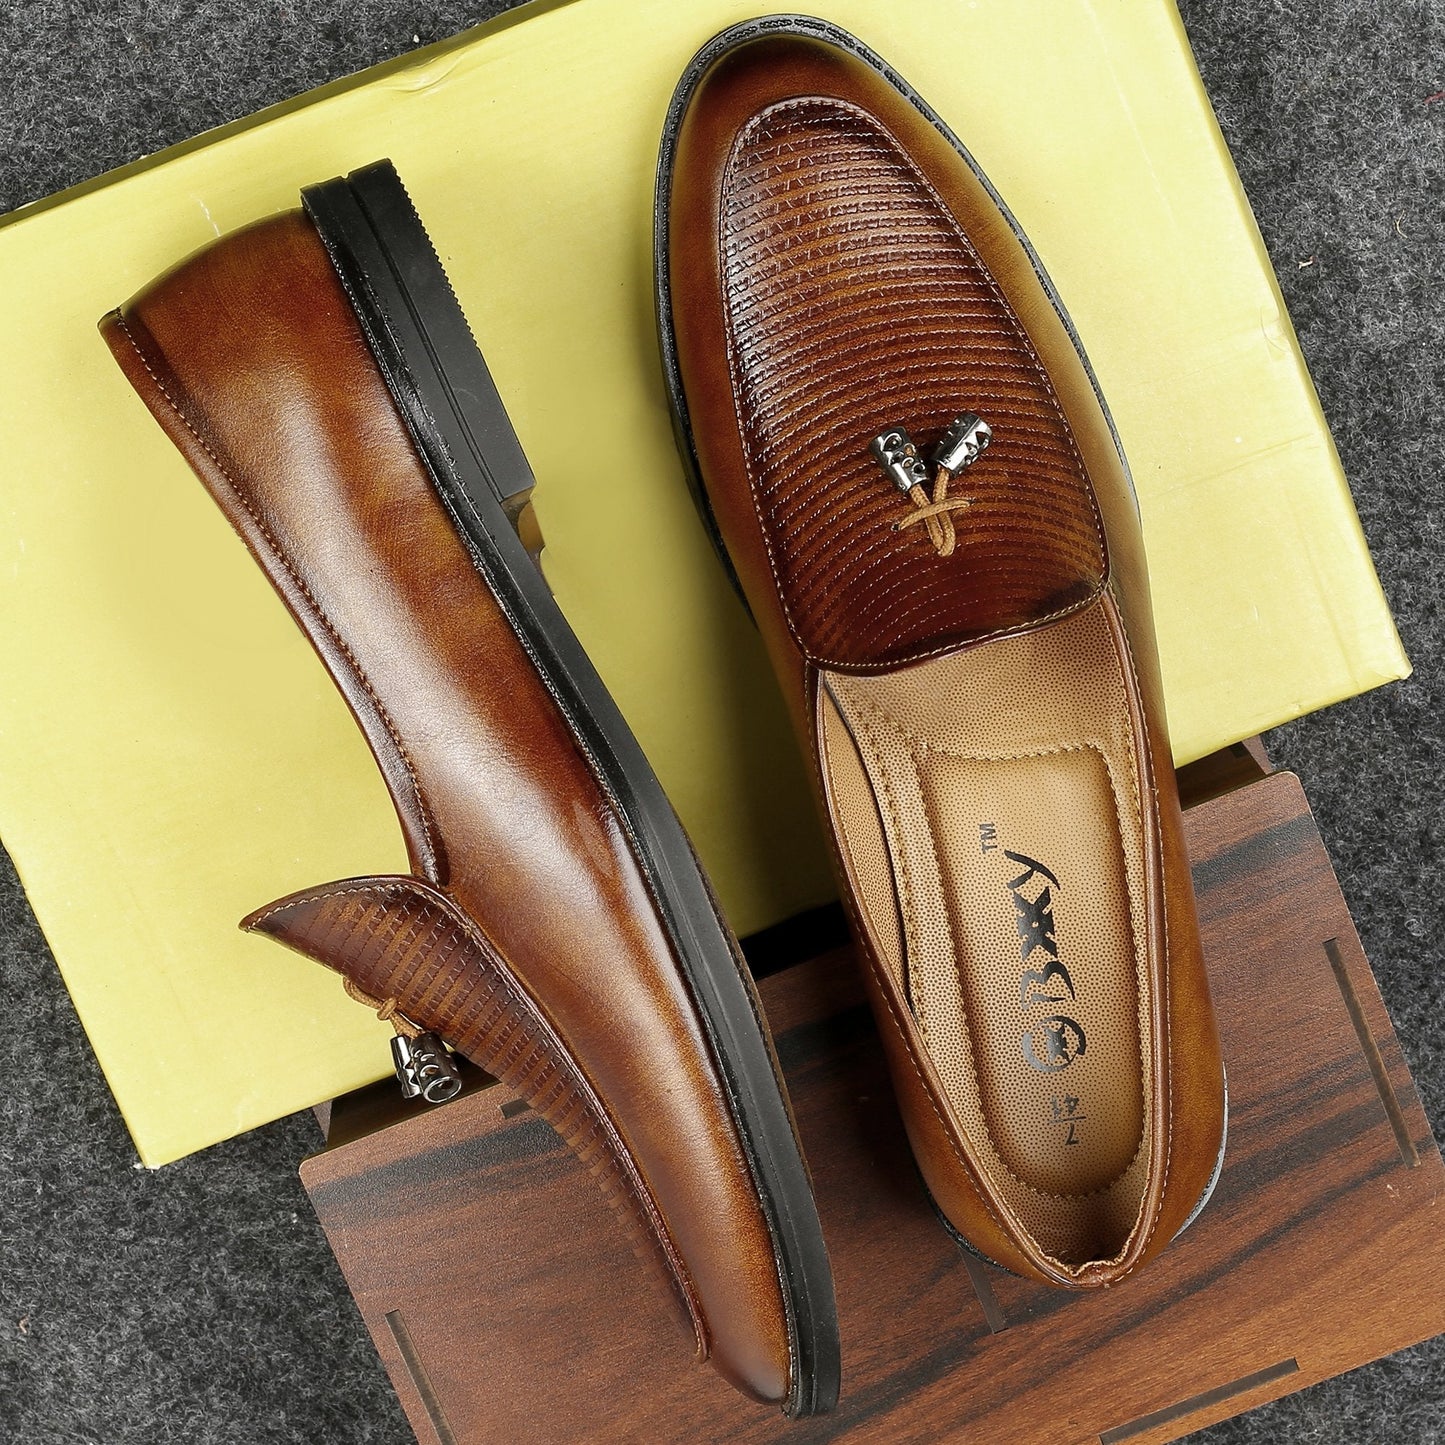 Bxxy's Faux Leather Casual Moccasins Slip-ons